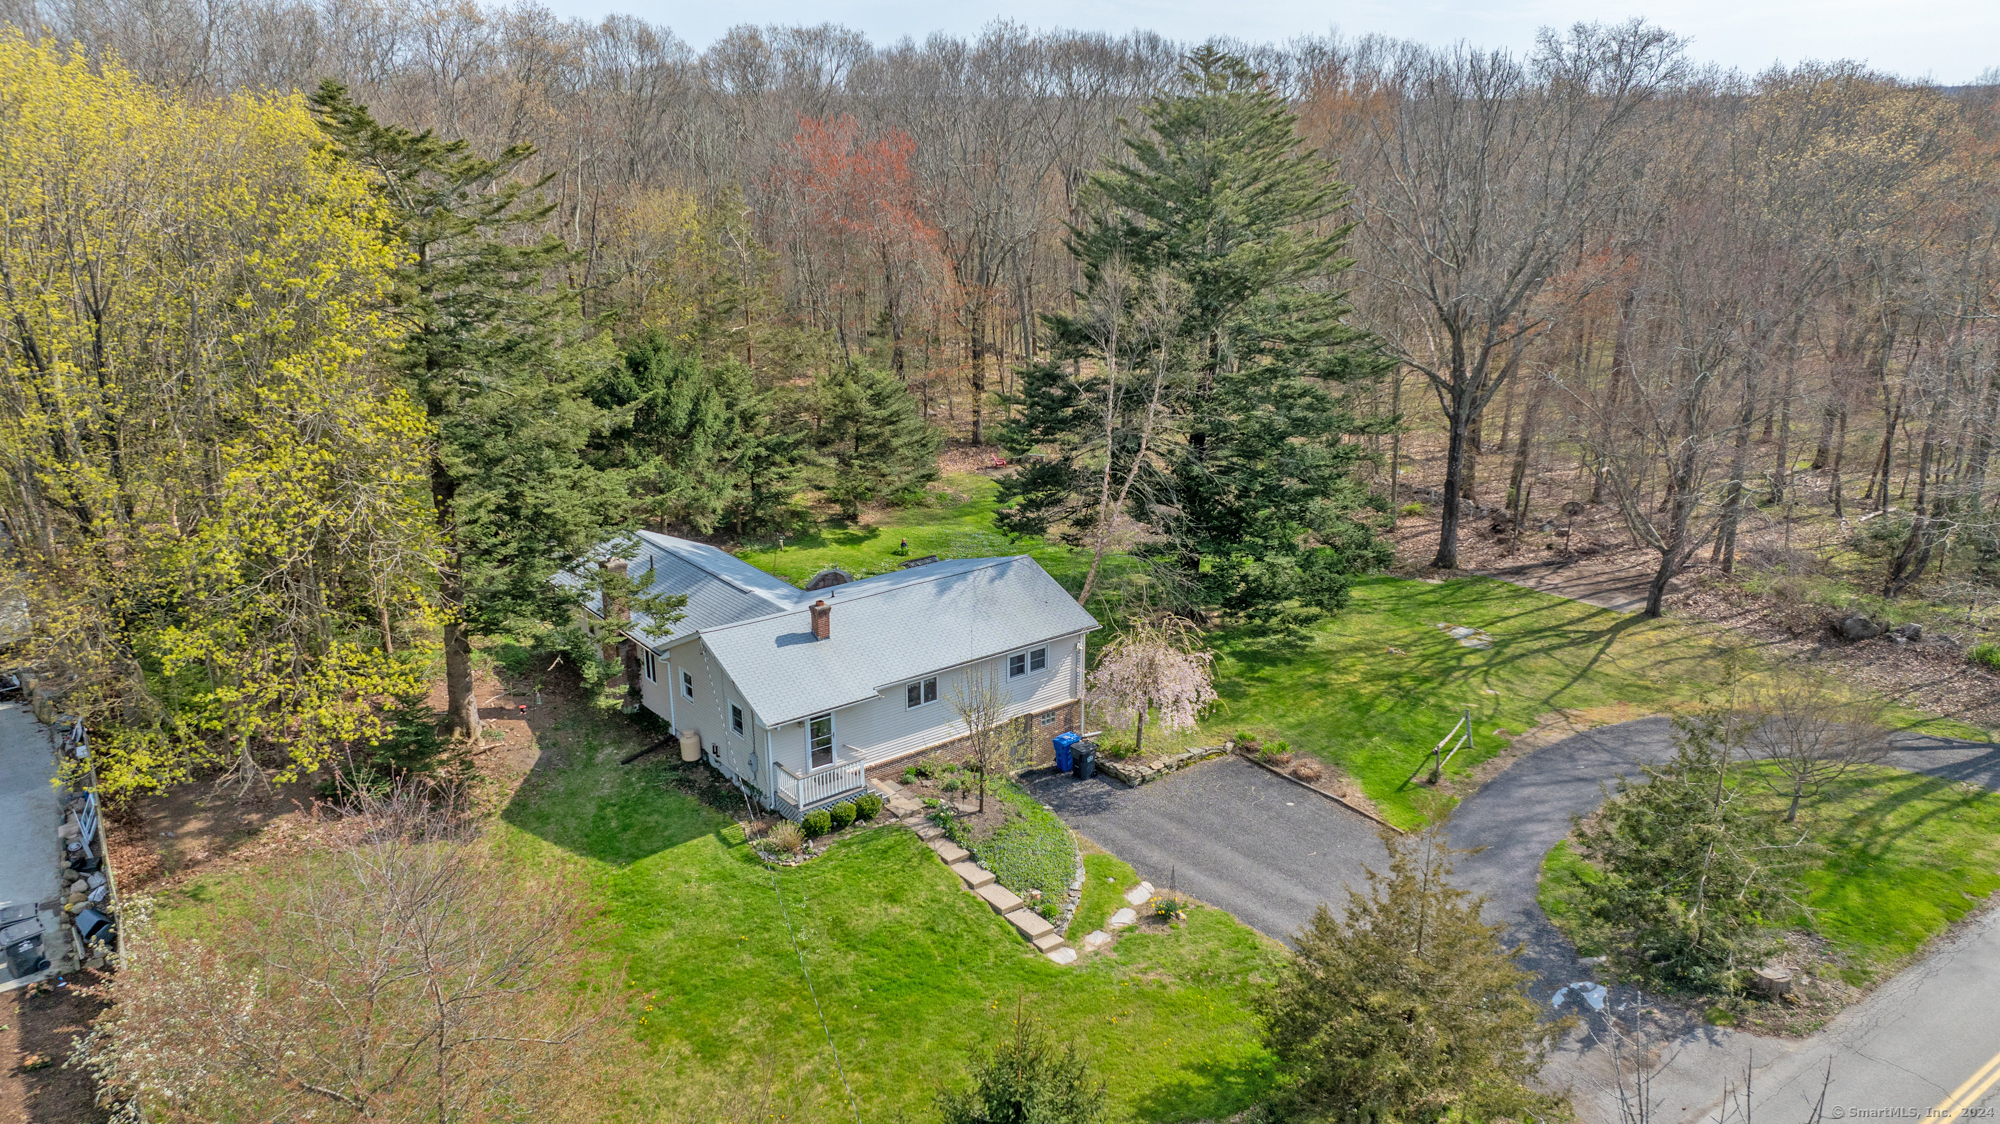 View Montville, CT 06370 house